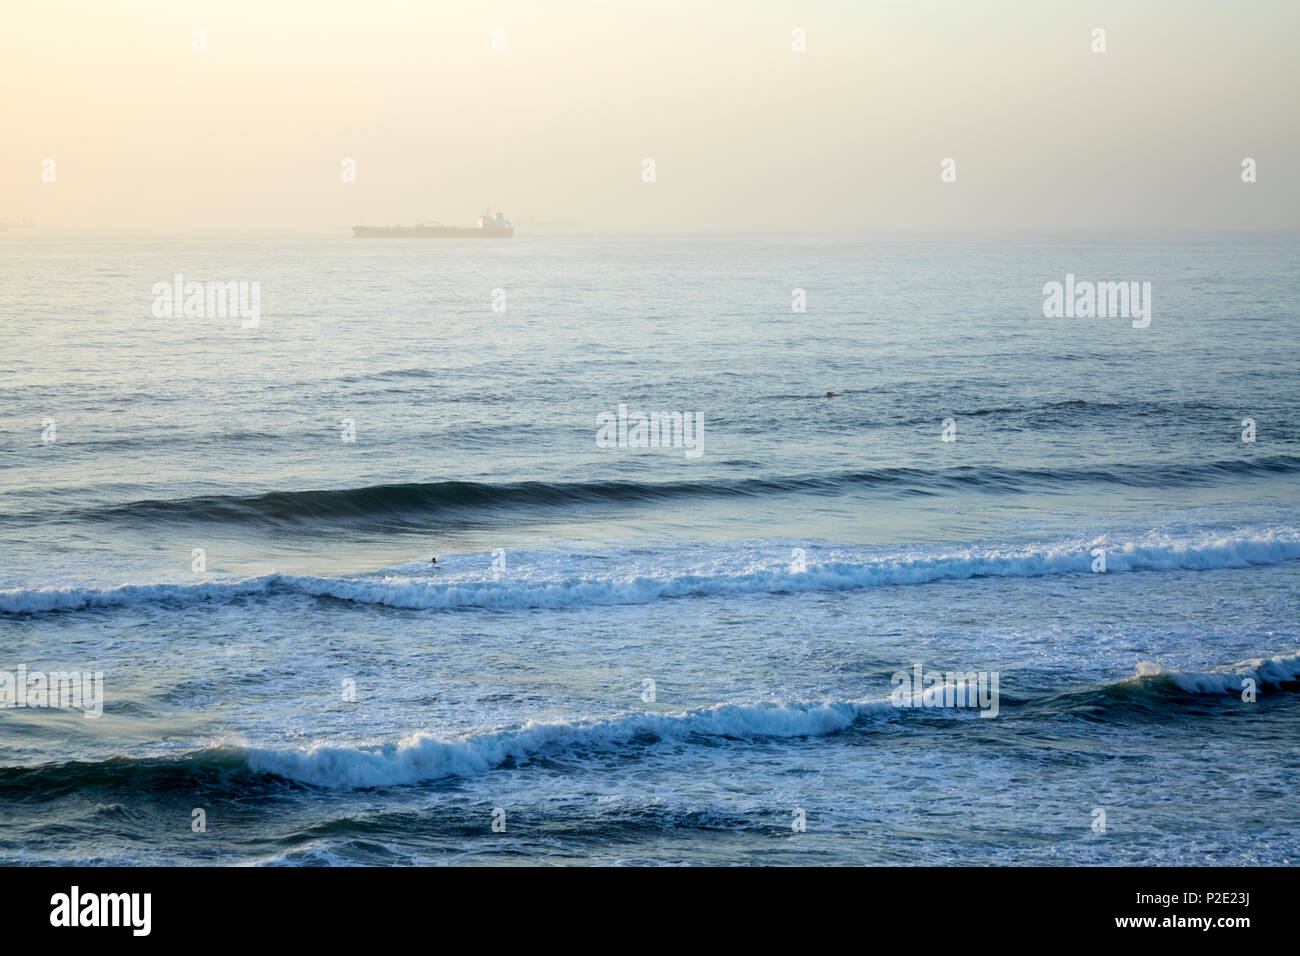 Ocean with tanker in mist at Umhlanga Rocks, Umhlanga, South Africa Stock Photo